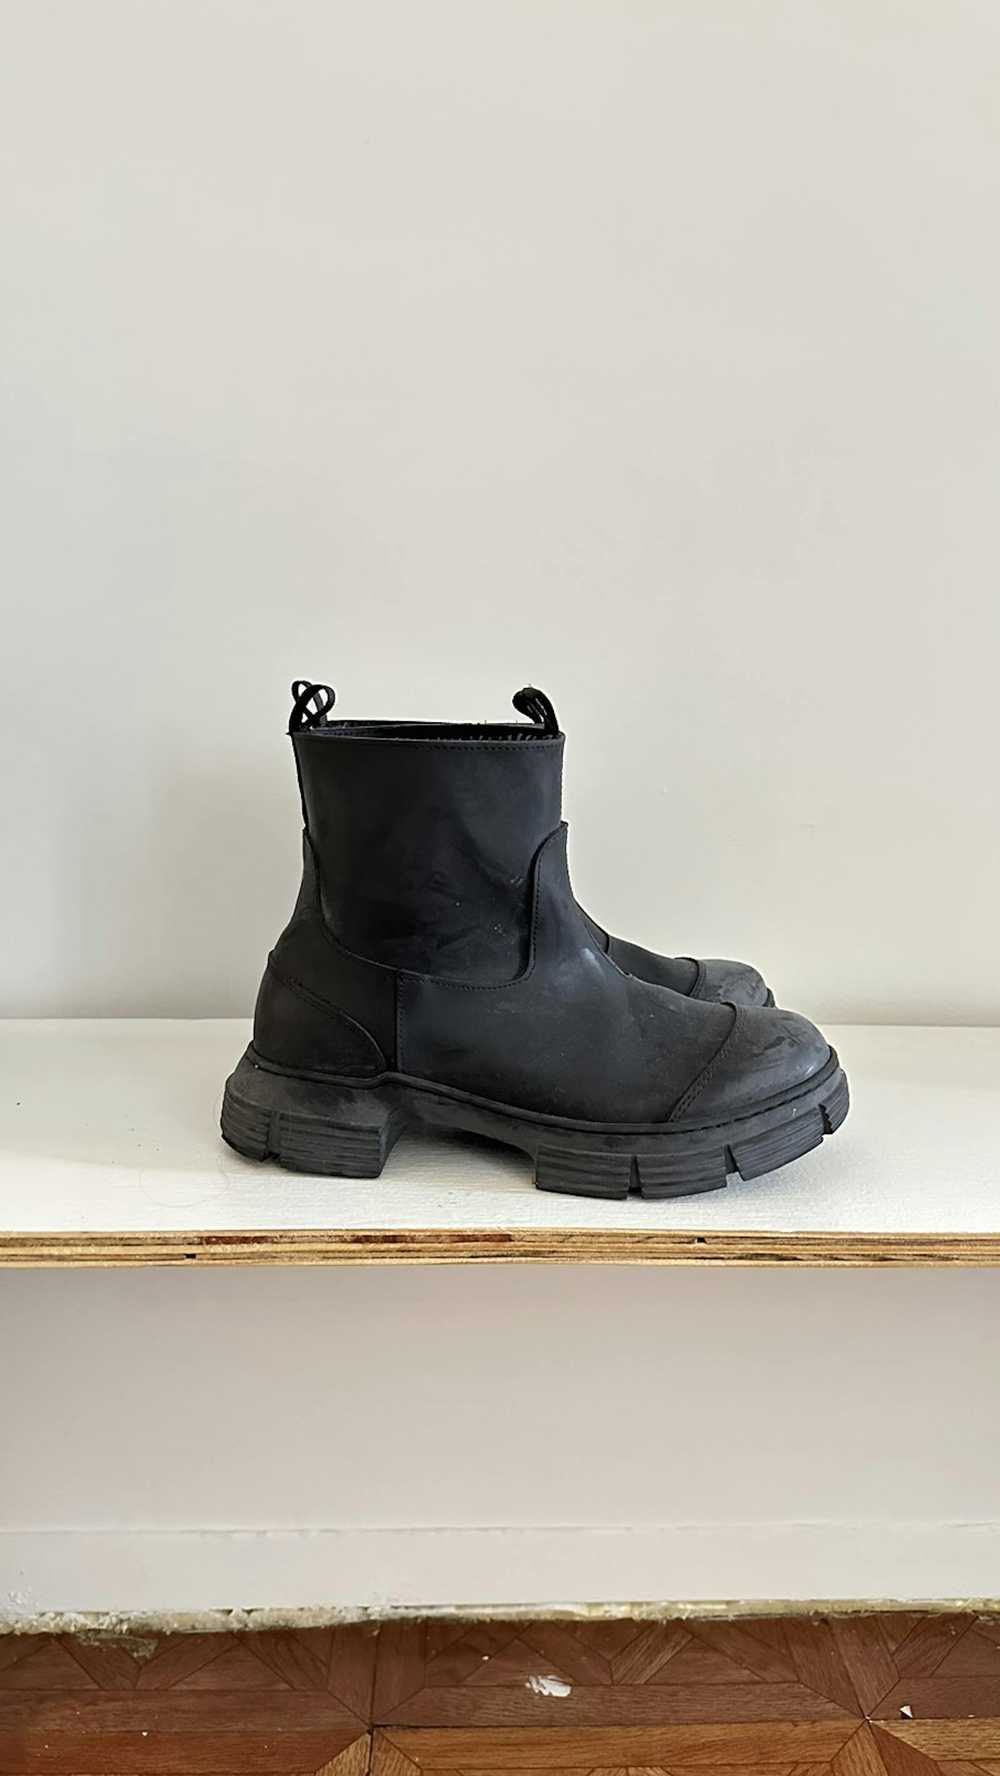 Ganni Ganni Recycled Rubber City Ankle Boots - image 4